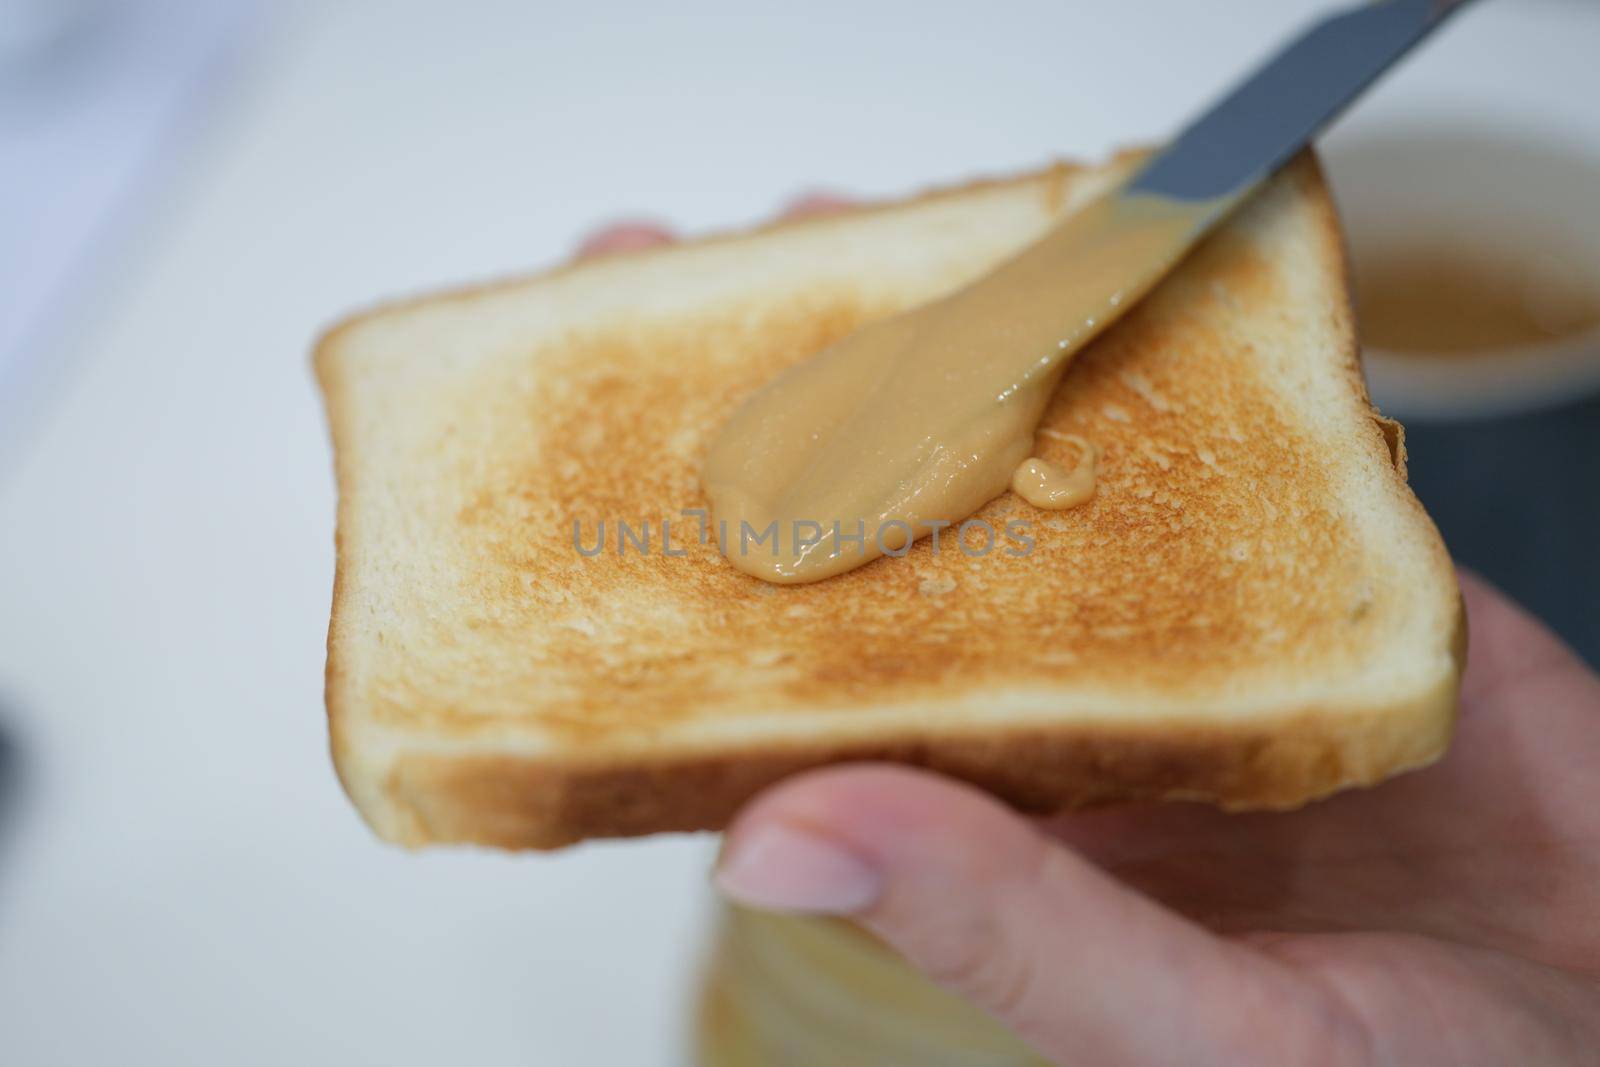 In hands toasted toast with peanut butter, close-up. Spread the nut butter with a knife, breakfast. Snack at home